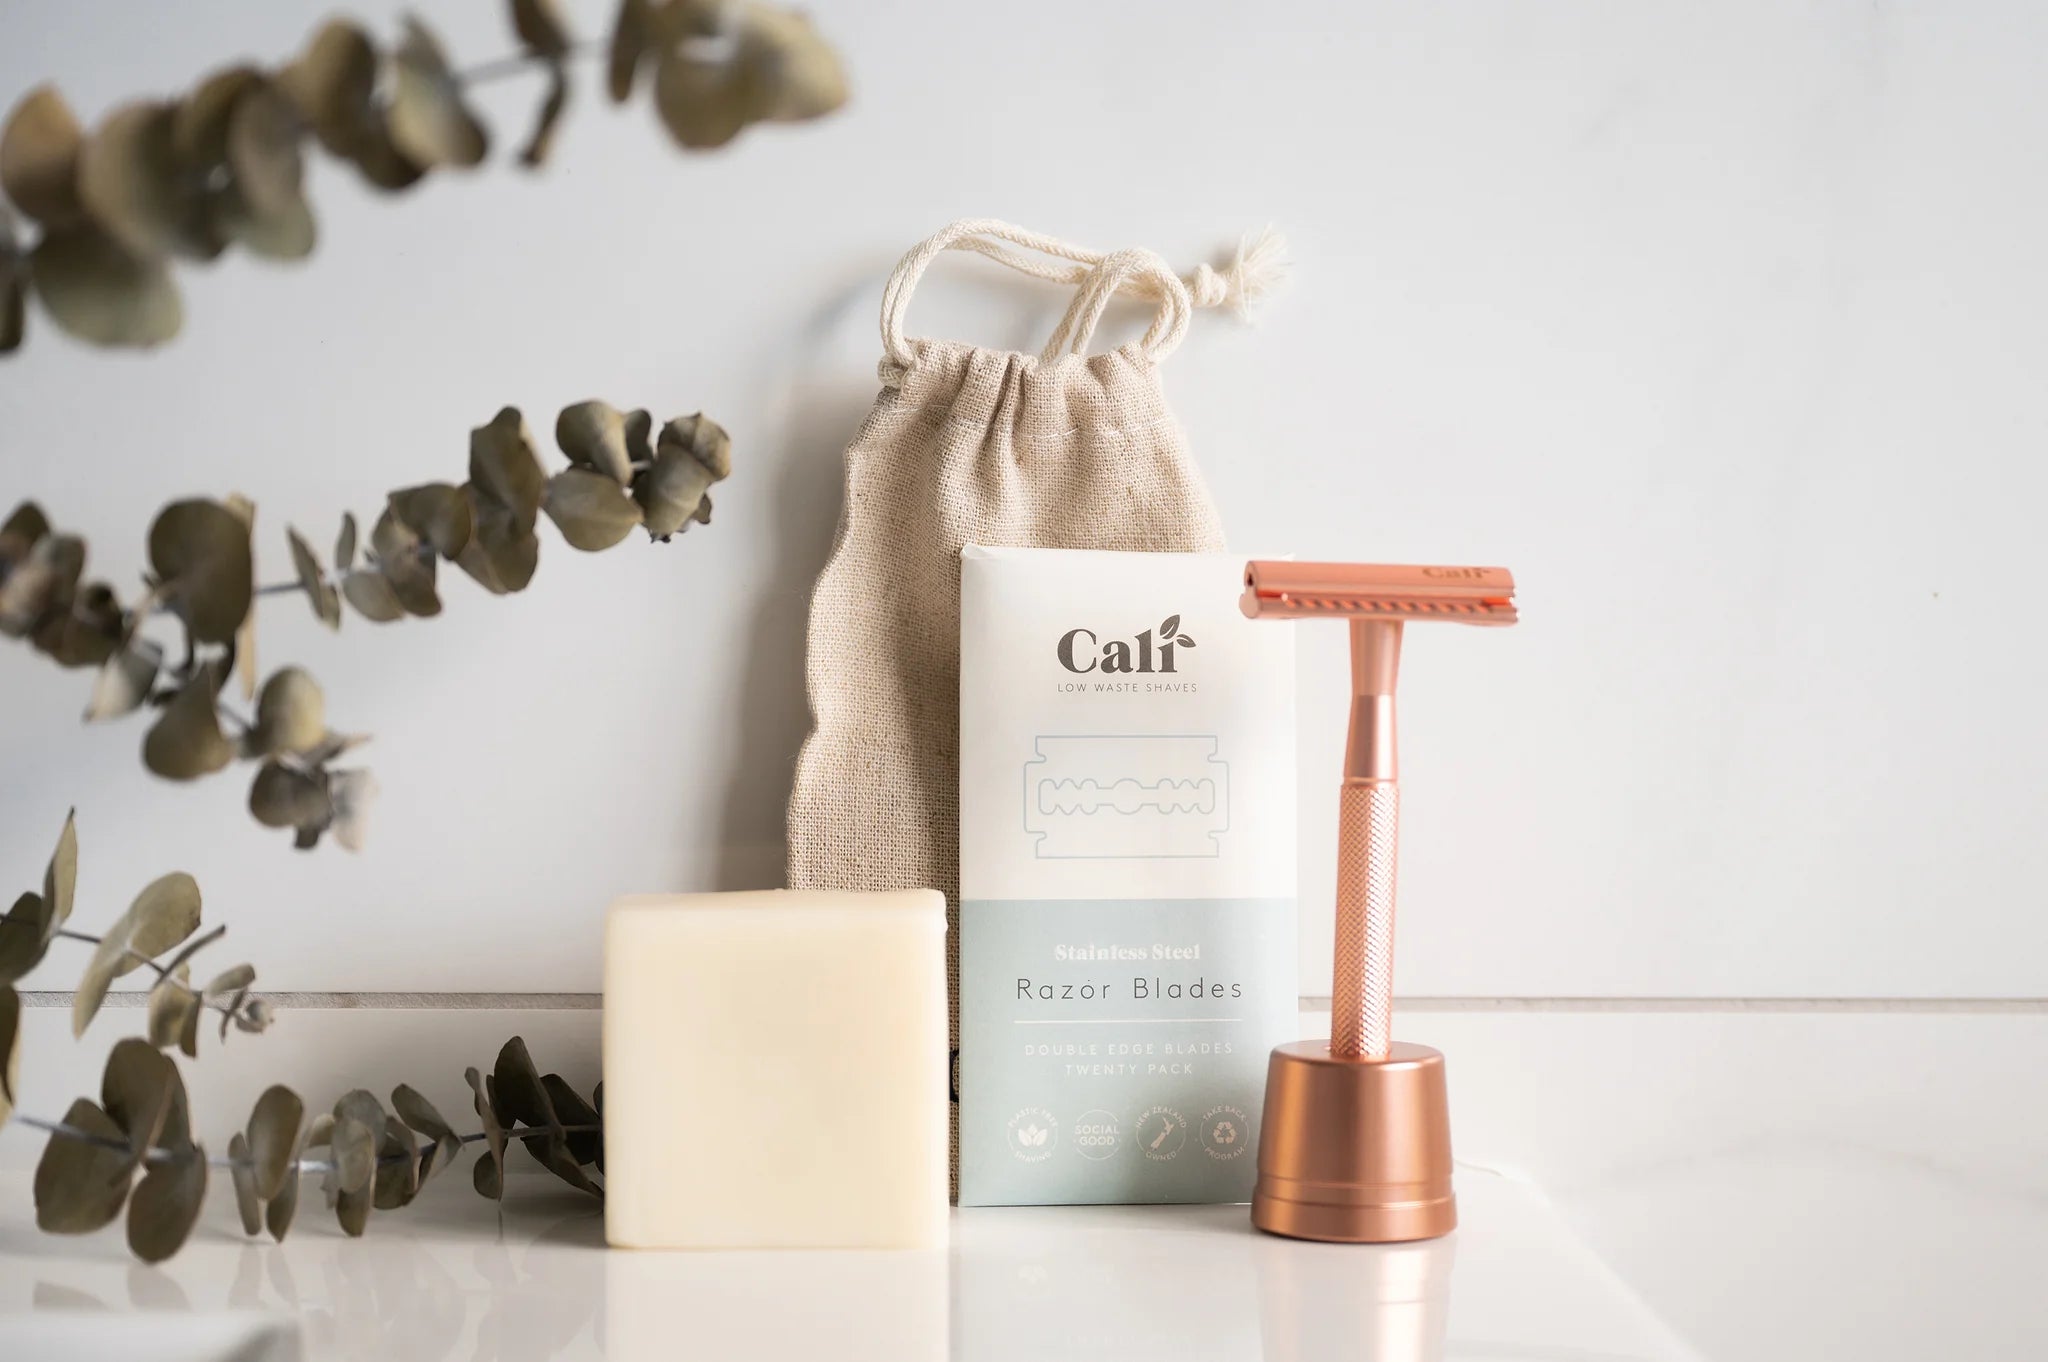 Caliwoods | Low Waste Shave Kit